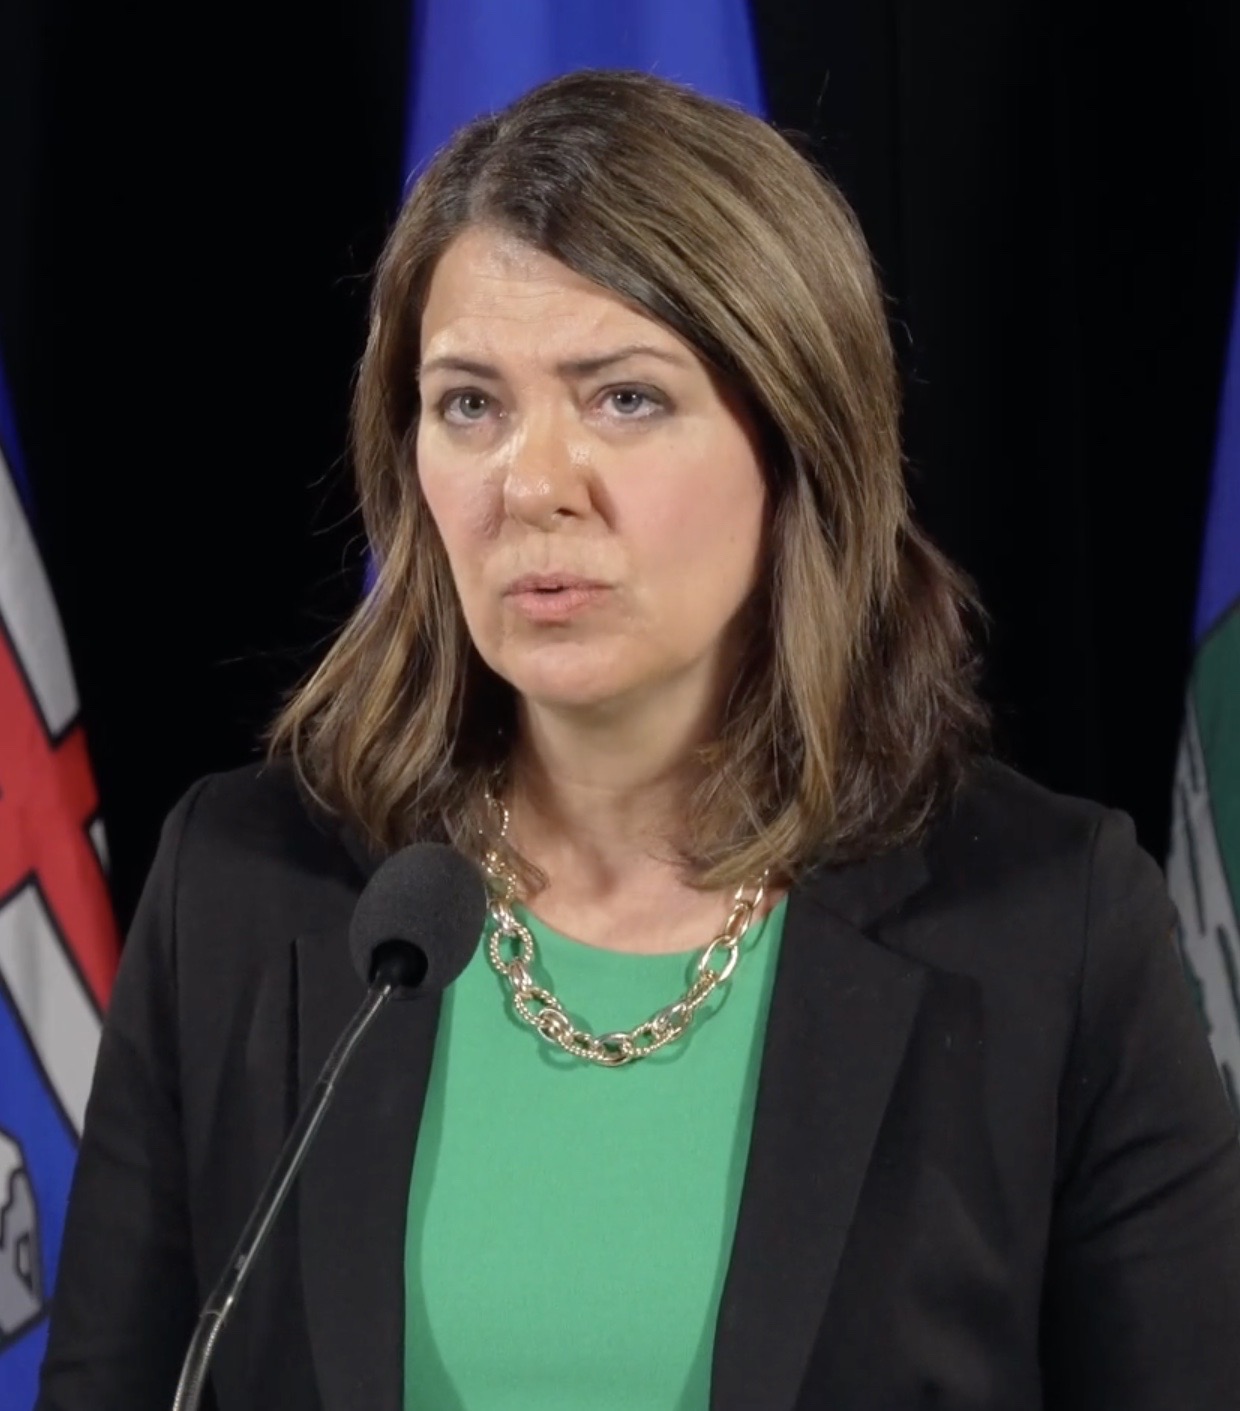 Premier of Alberta States Police Violated Criminal Code with Covid Mandates